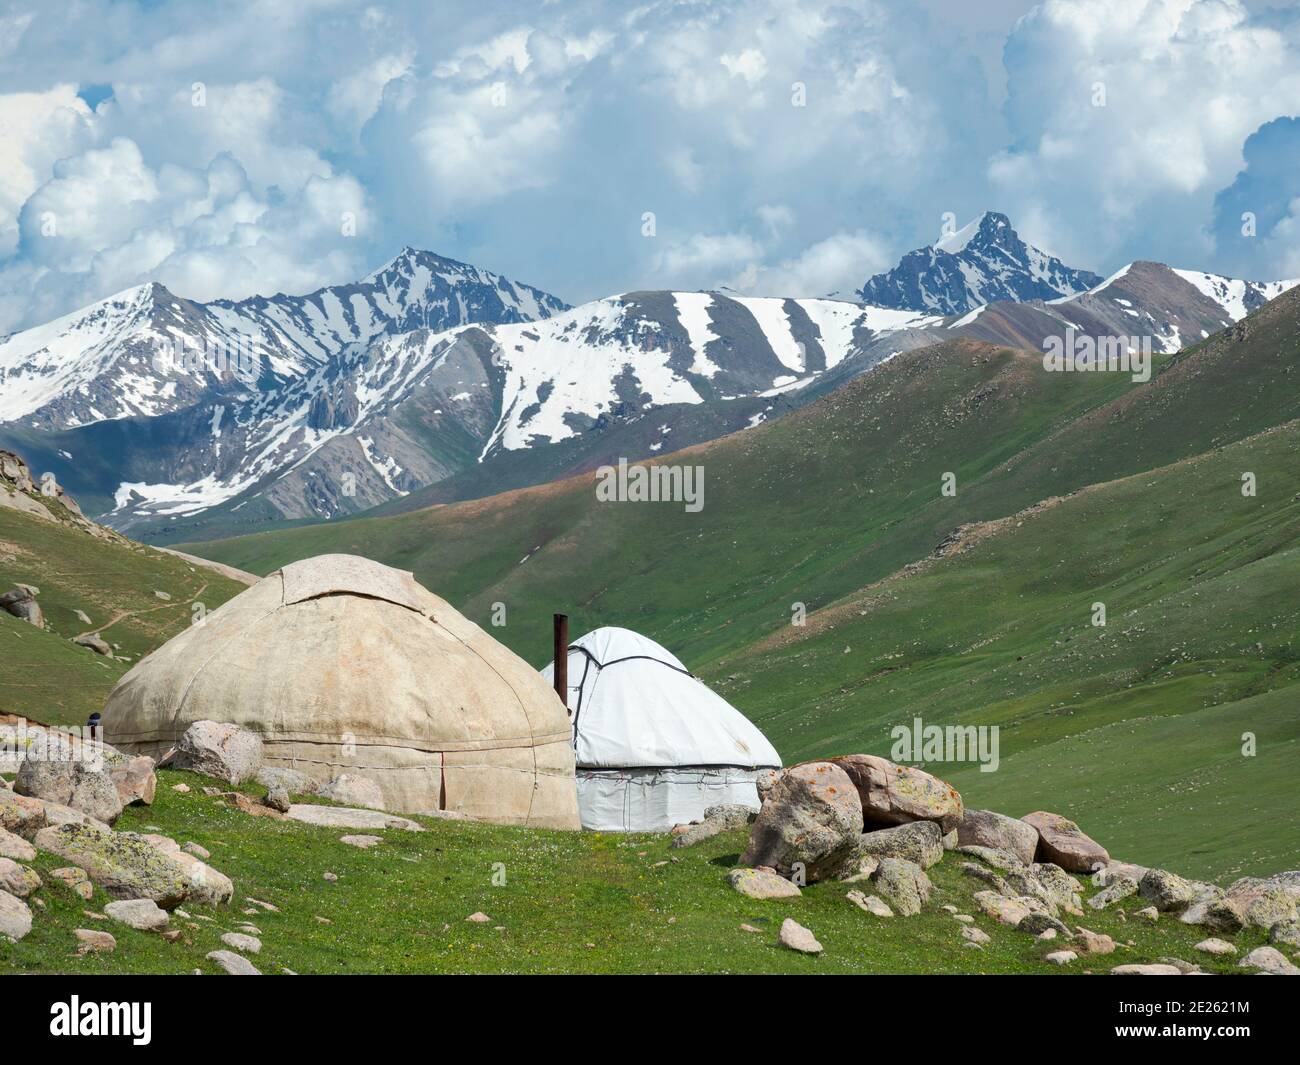 Landscape with Yurt at the  Oetmoek mountain pass in the Tien Shan or heavenly mountains. Asia, Central Asia, Kyrgyzstan Stock Photo